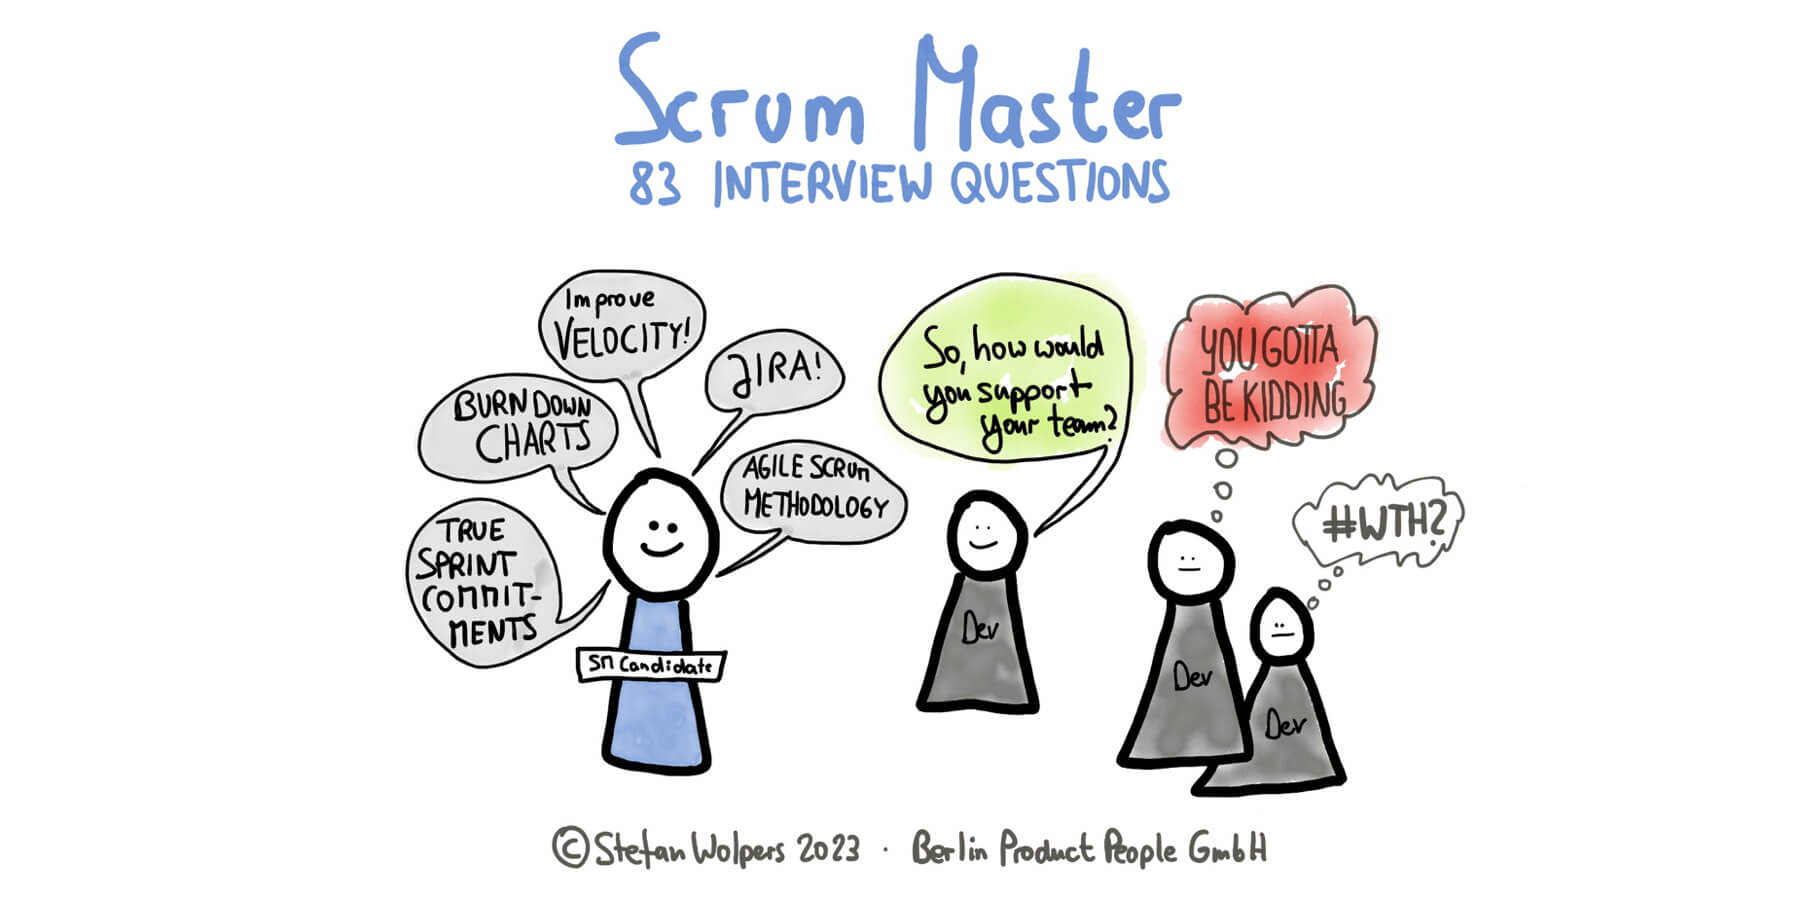 Scrum Master Interview Questions Set XII: On Creating Value with Scrum — Berlin-Product-People.com